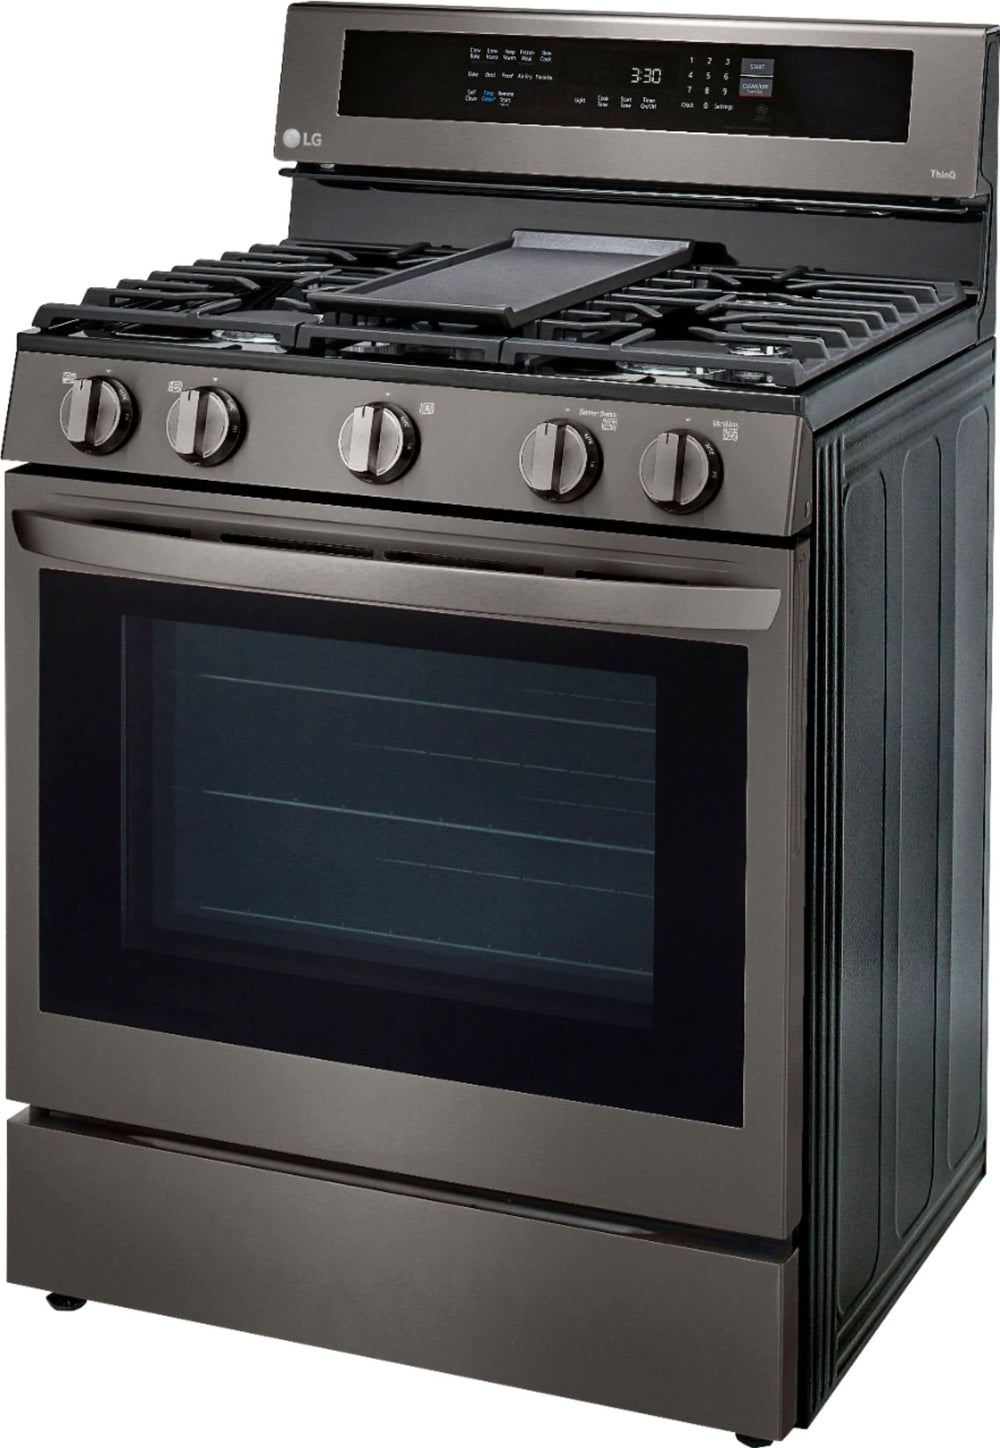 LG - 5.8 Cu. Ft. Freestanding Gas True Convection Range with EasyClean, InstaView and AirFry - Black stainless steel_1